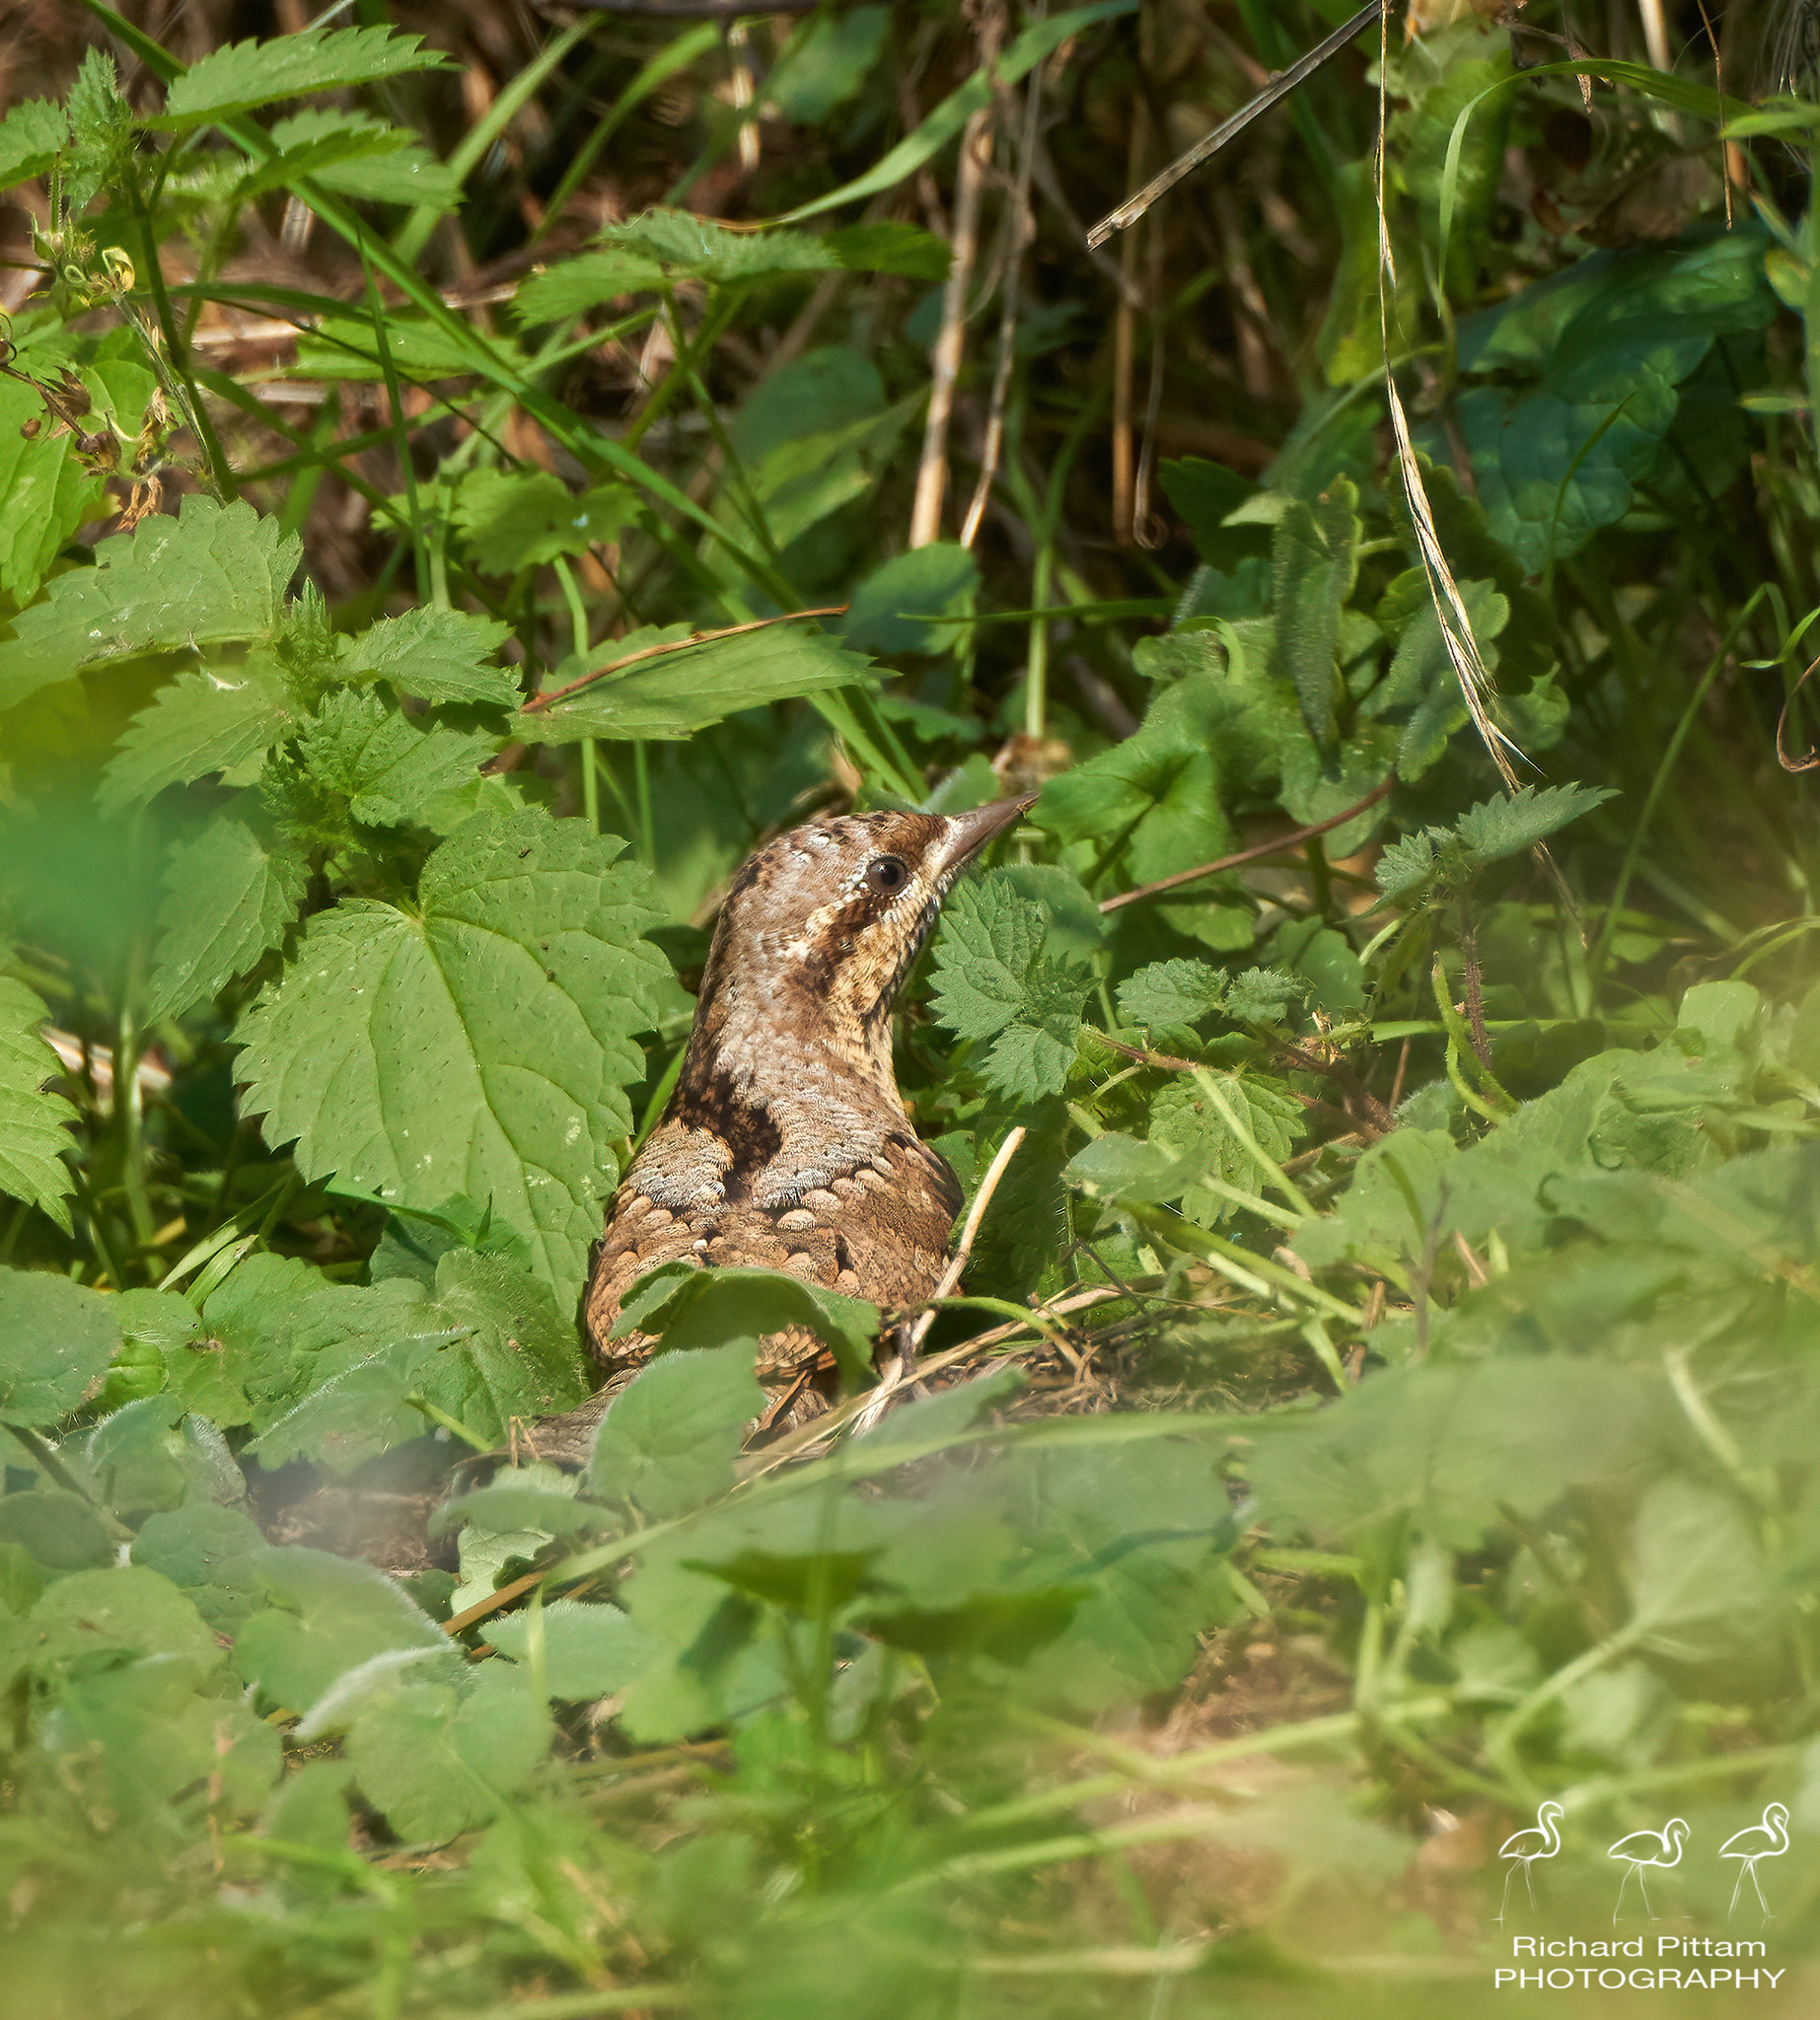 Wrneck - too hot and too much vegetation for any decent images sadly